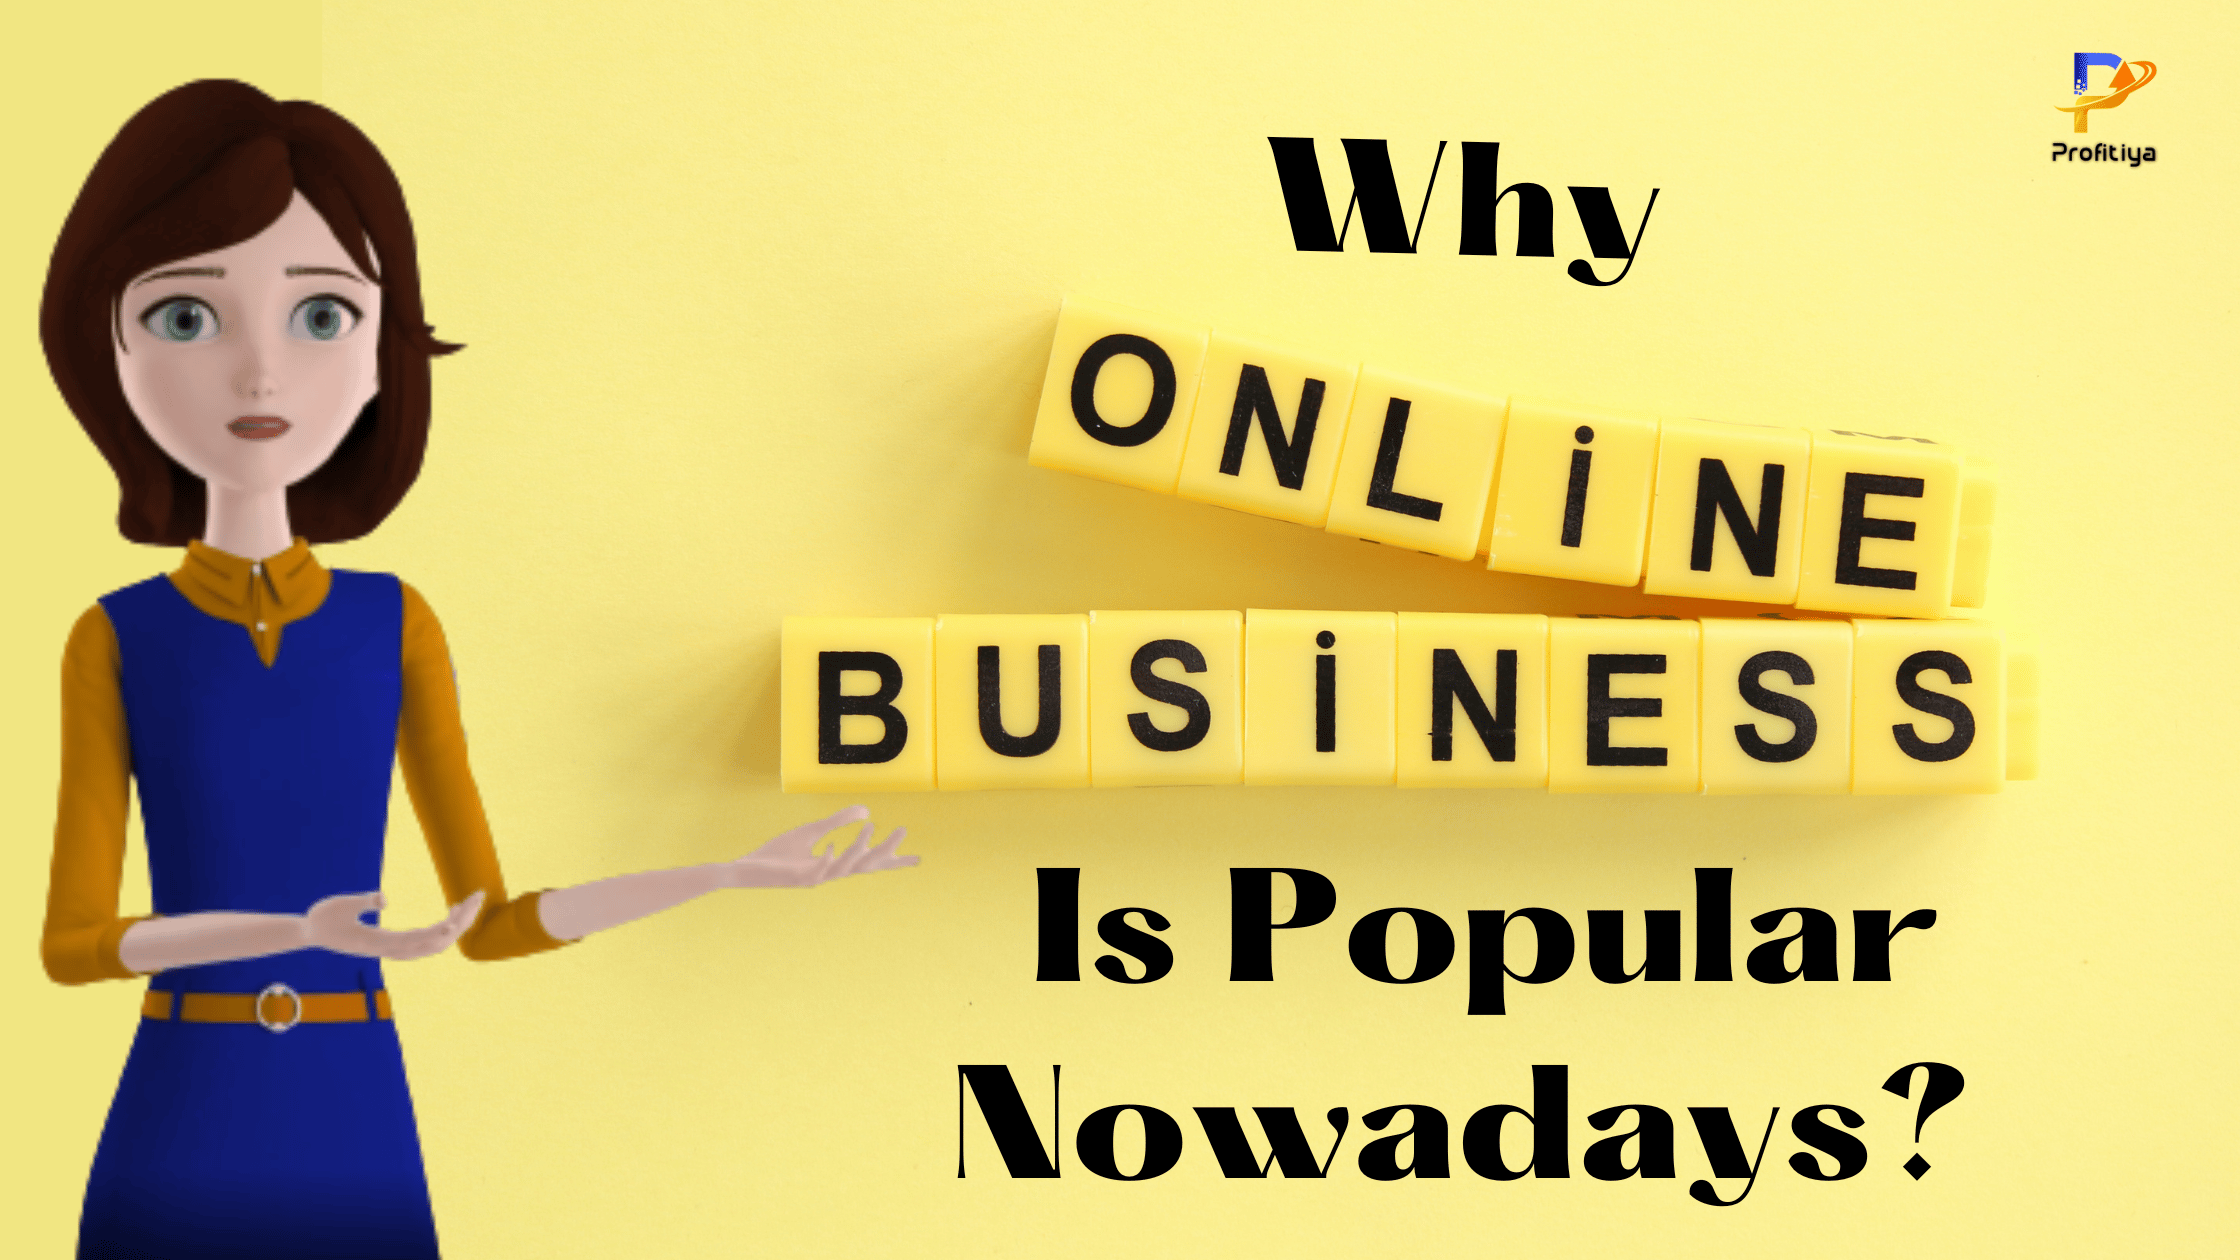 Why Online Business Is Popular Nowadays?